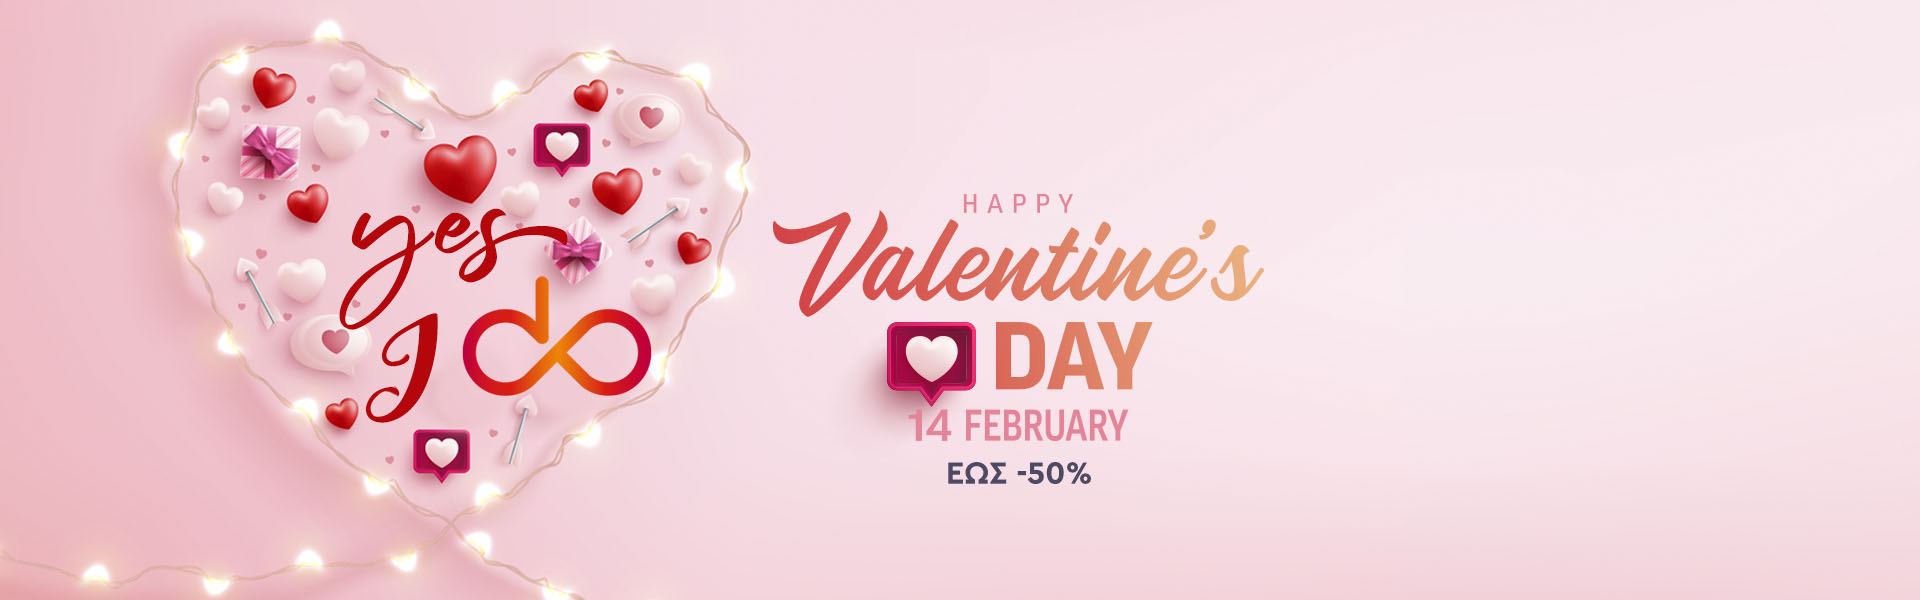 Valentines Day Offers